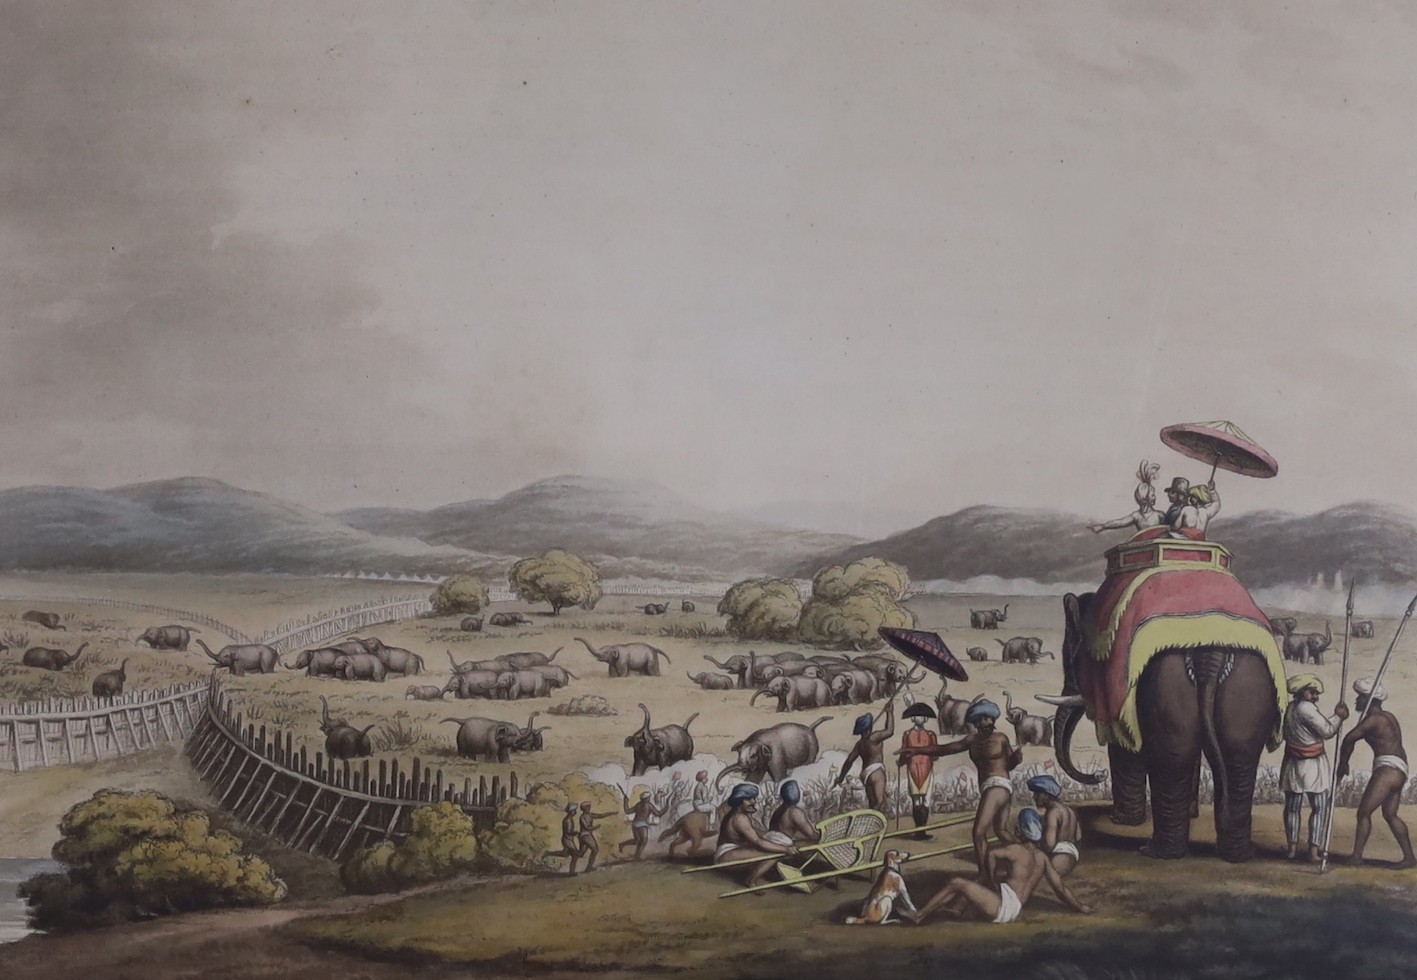 Edward Orme Publ. 1805, four colour prints from Oriental Field Sports, 'The Tiger at Bay', 'The Hog Deer at Bay', 'Hunting a Kuttauss or Civit Cat' and 'Driving elephants into a keddah', overall 36 x 47cm